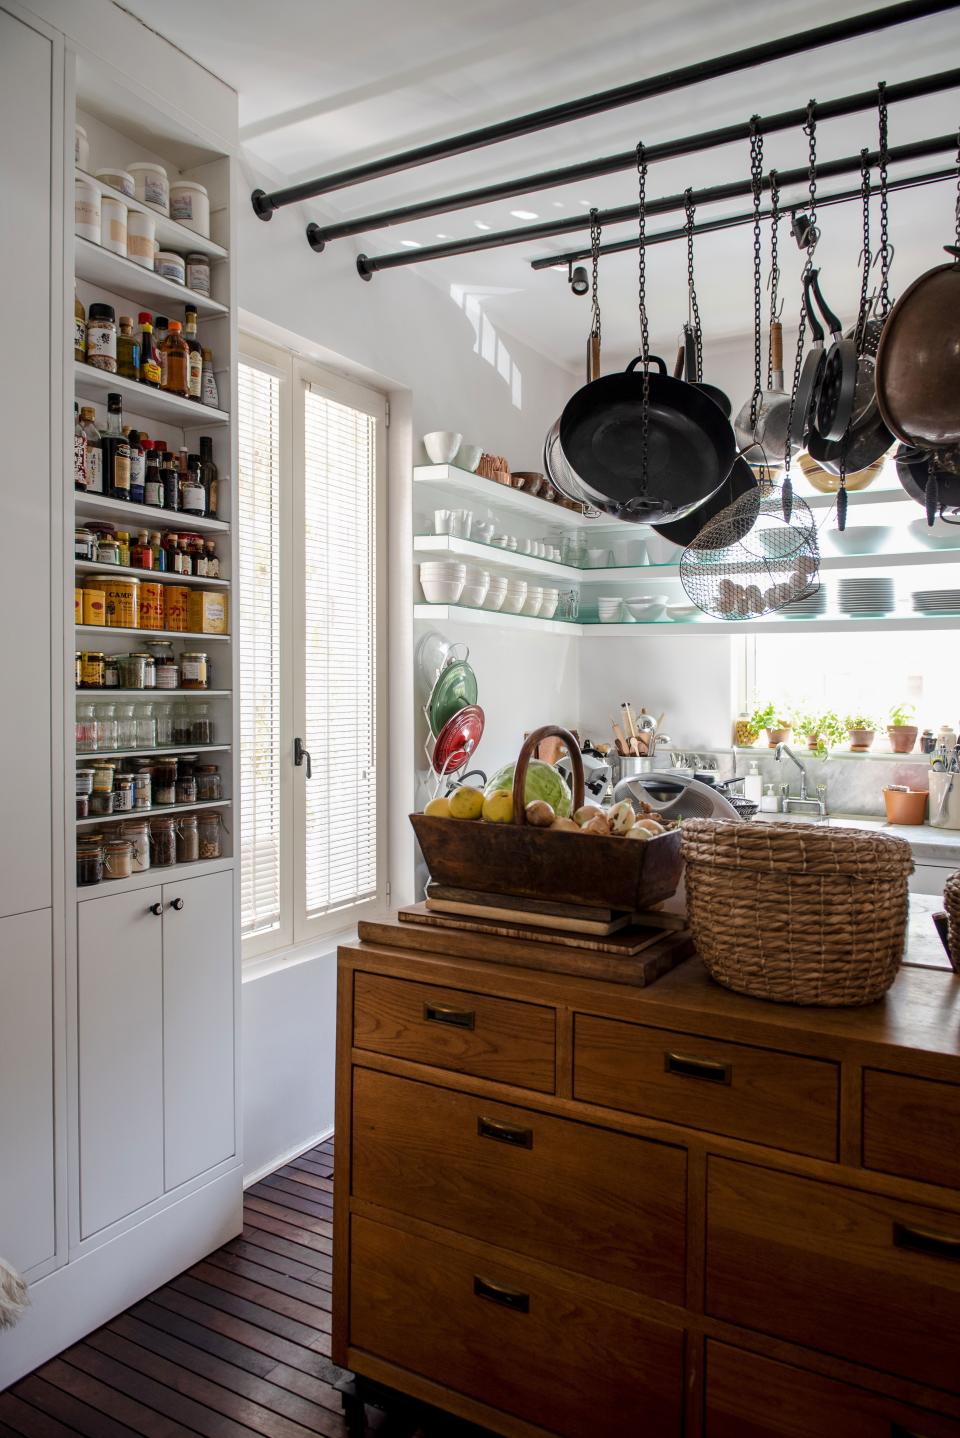 Every facet of the couple’s kitchen was crafted by a local carpenter. The cabinets are painted in white oil and the chest of drawers is made of pure oak; a mix of custom-designed rods and chains suspend various pots and pans in the air, making for easy access.